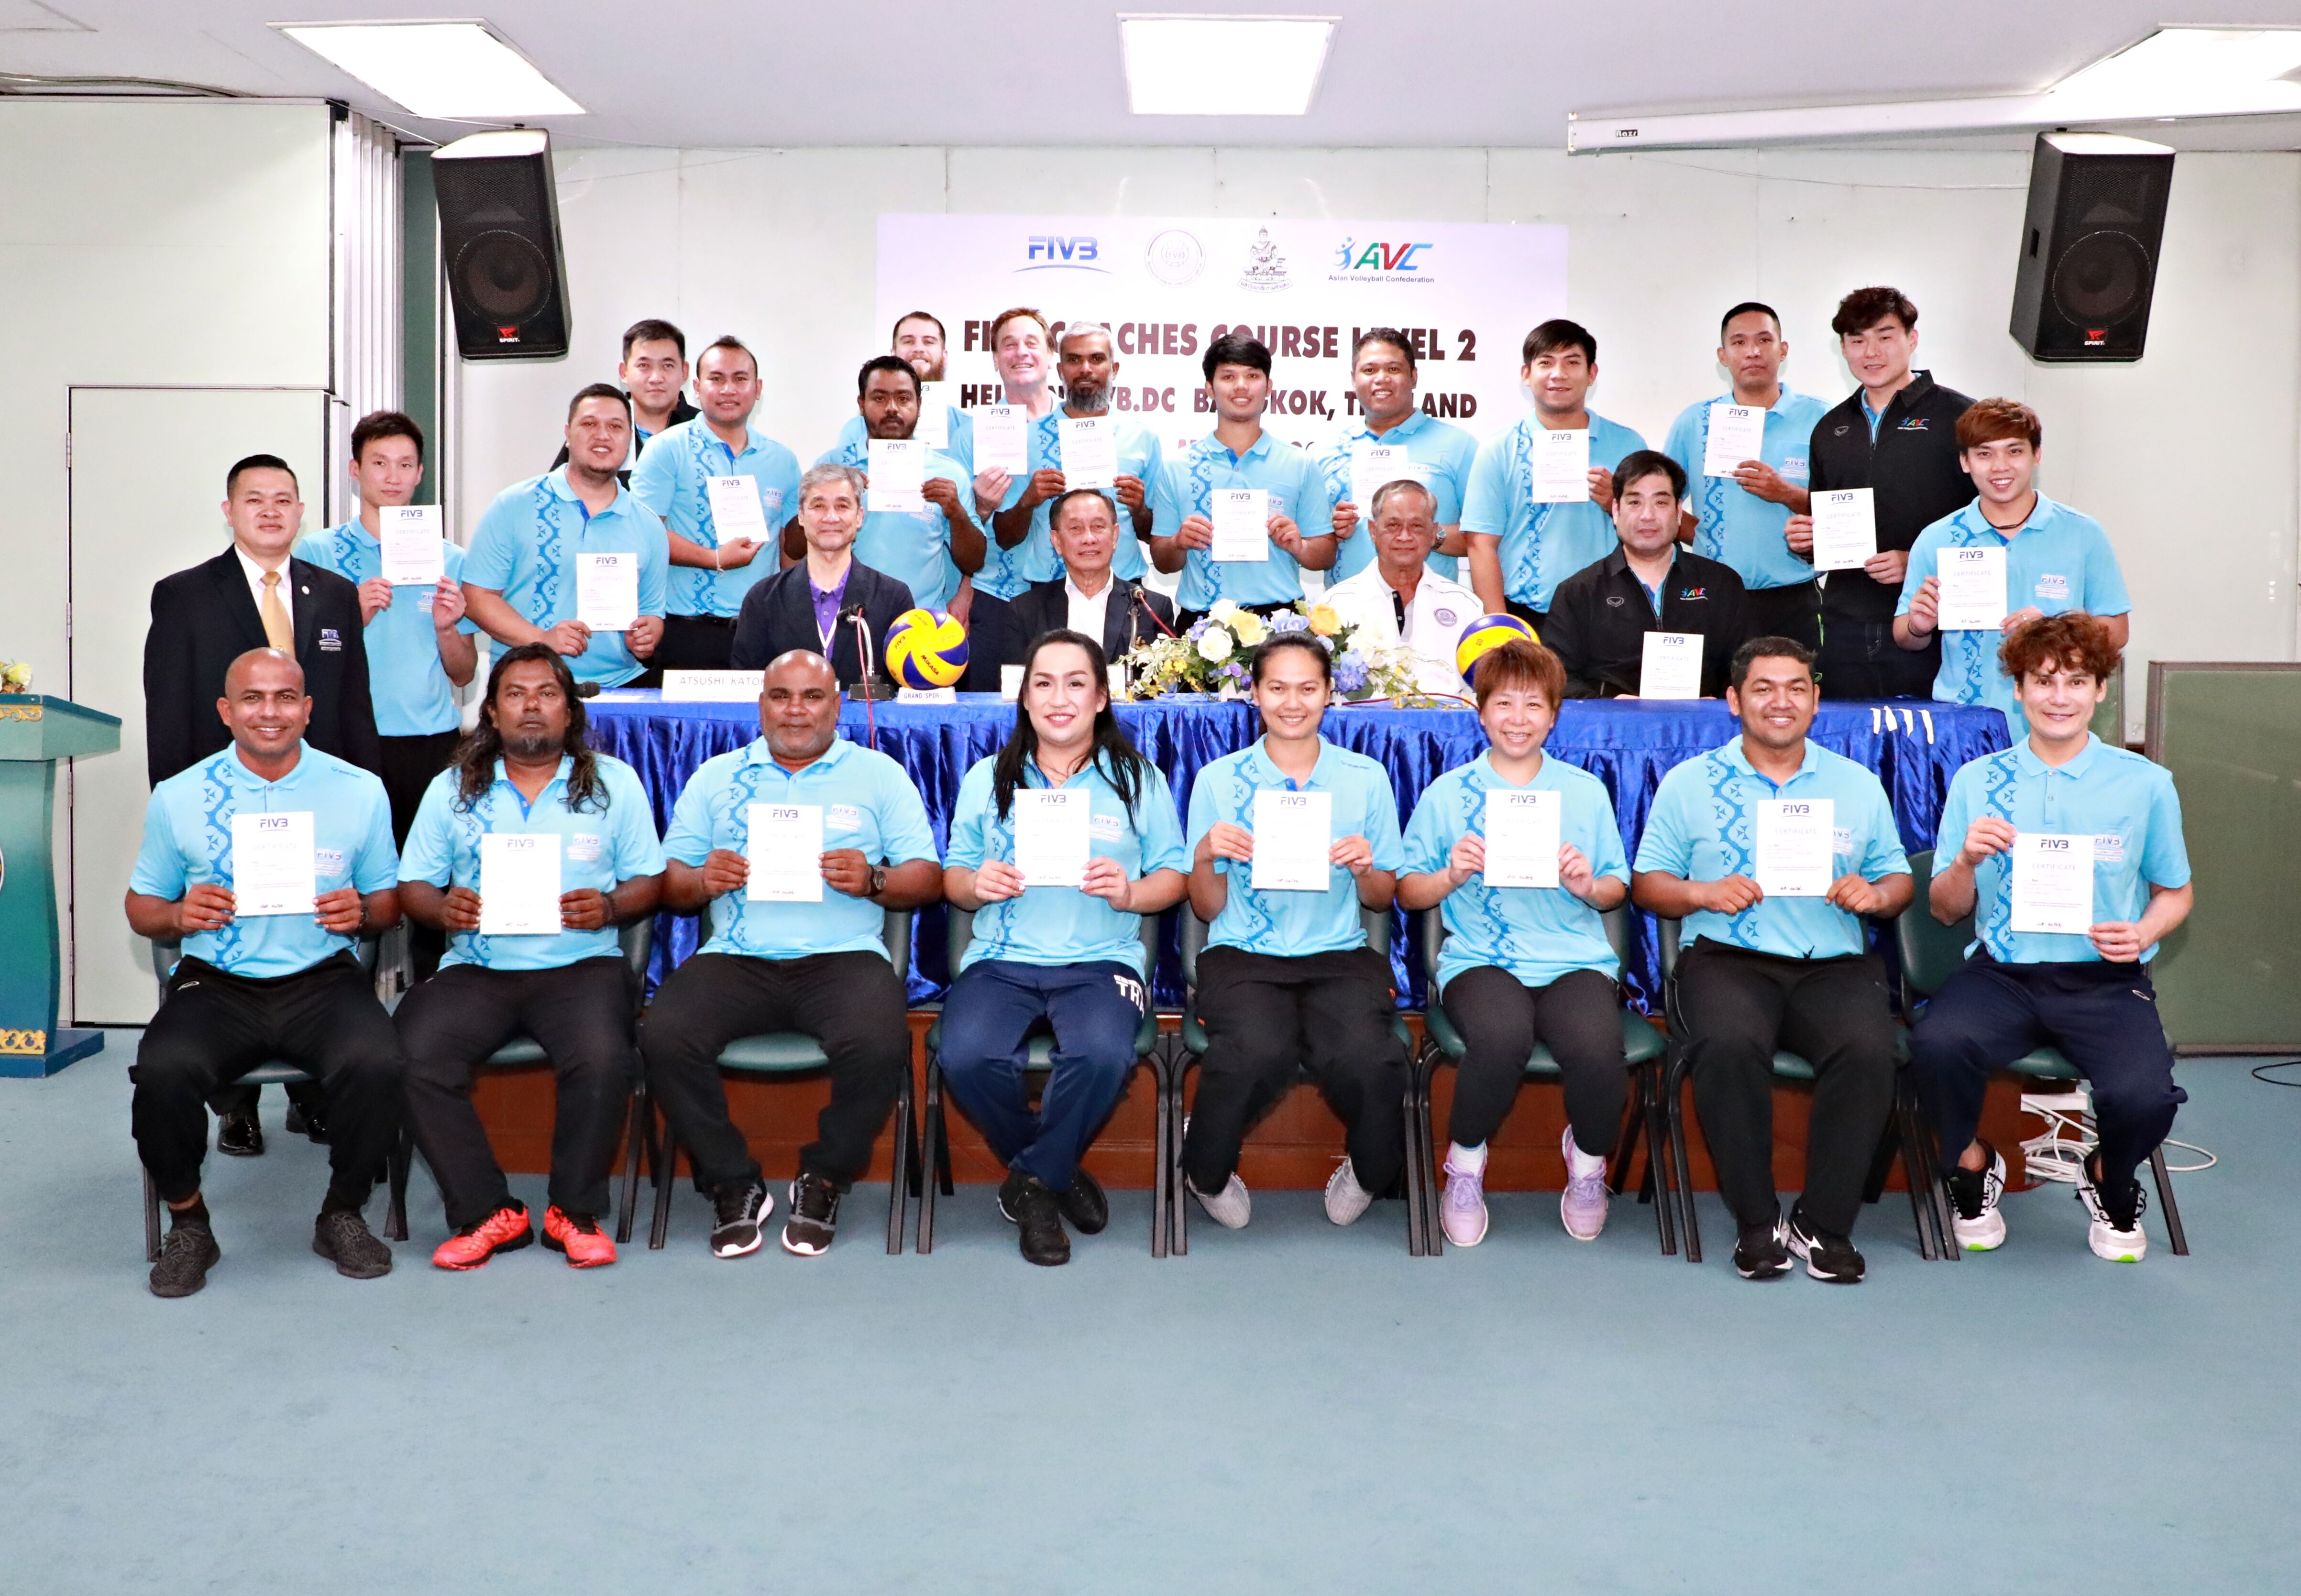 FIVB LEVEL II COACHES COURSE COMPLETED IN THAILAND